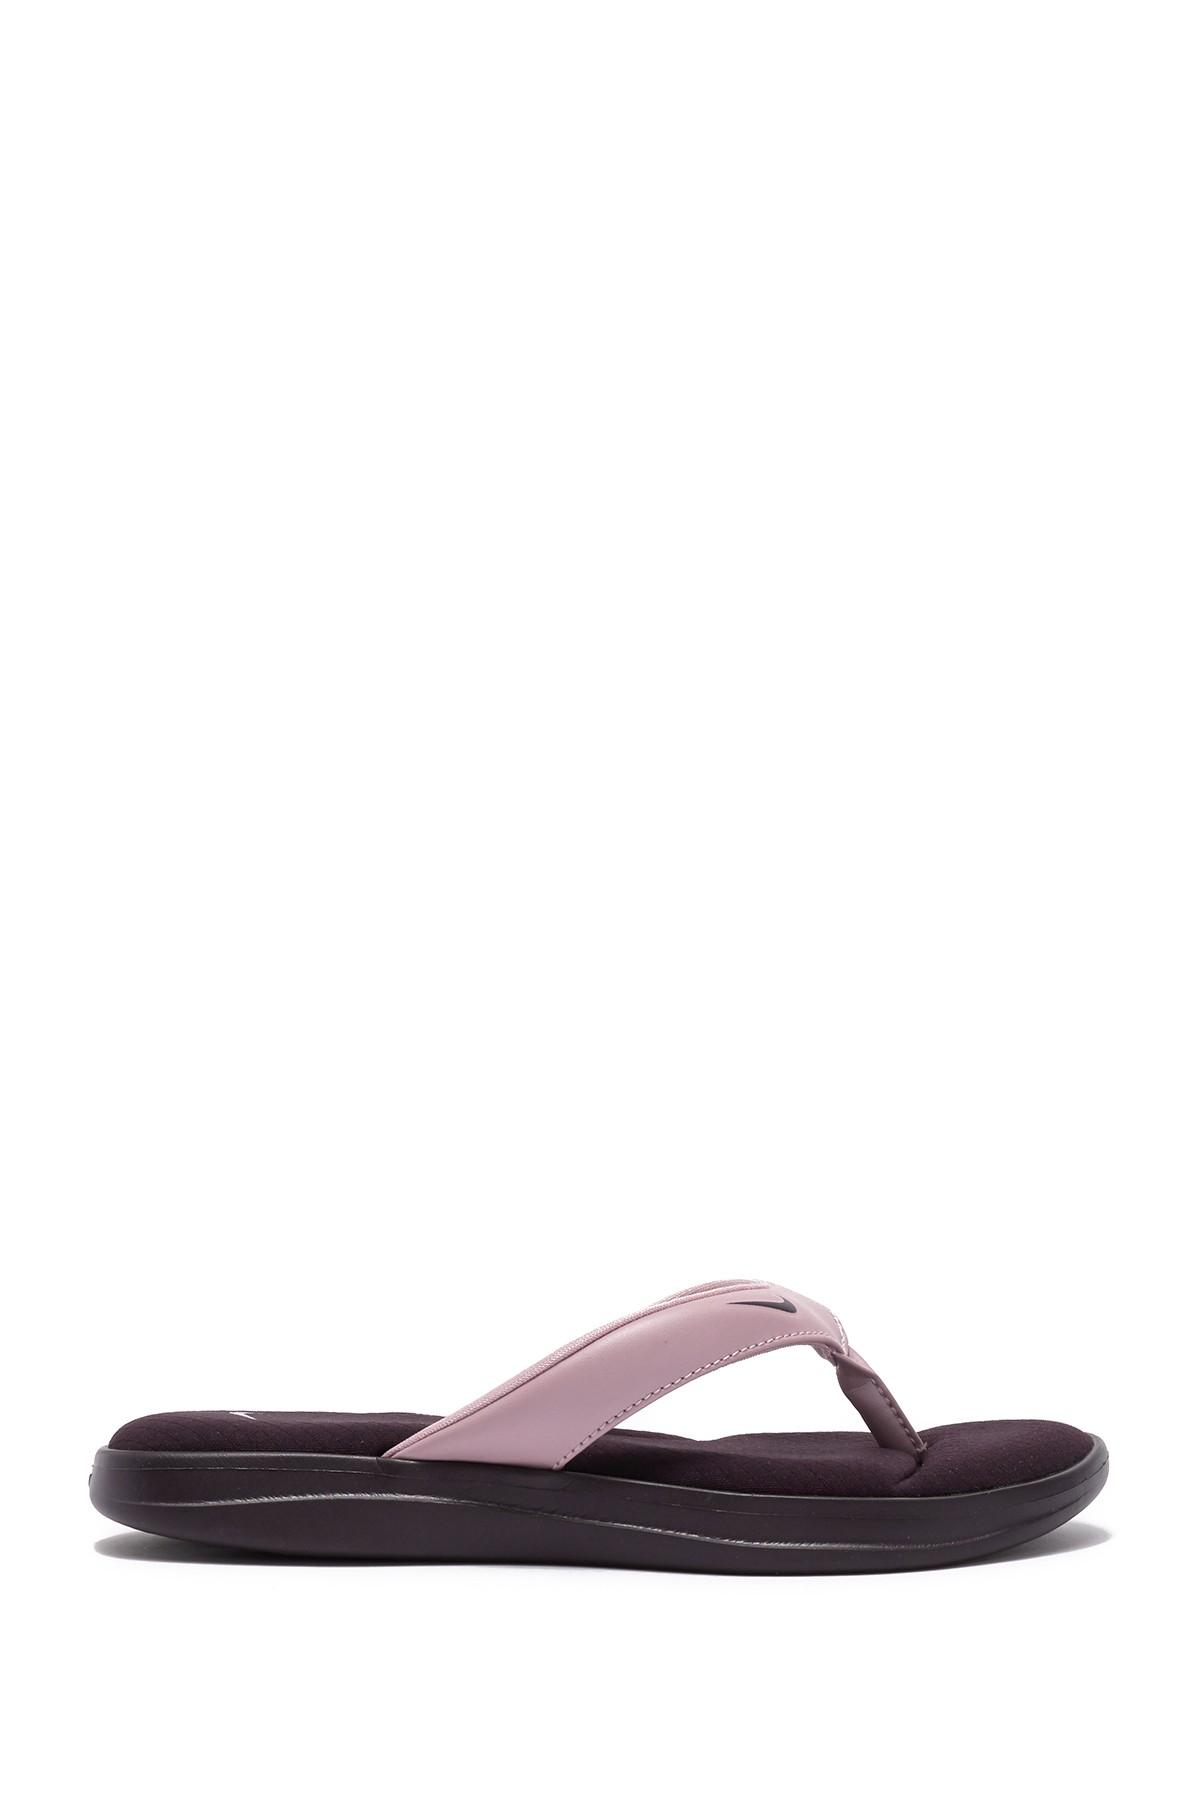 Nike Icon Classic Women's Sandals. Nike VN